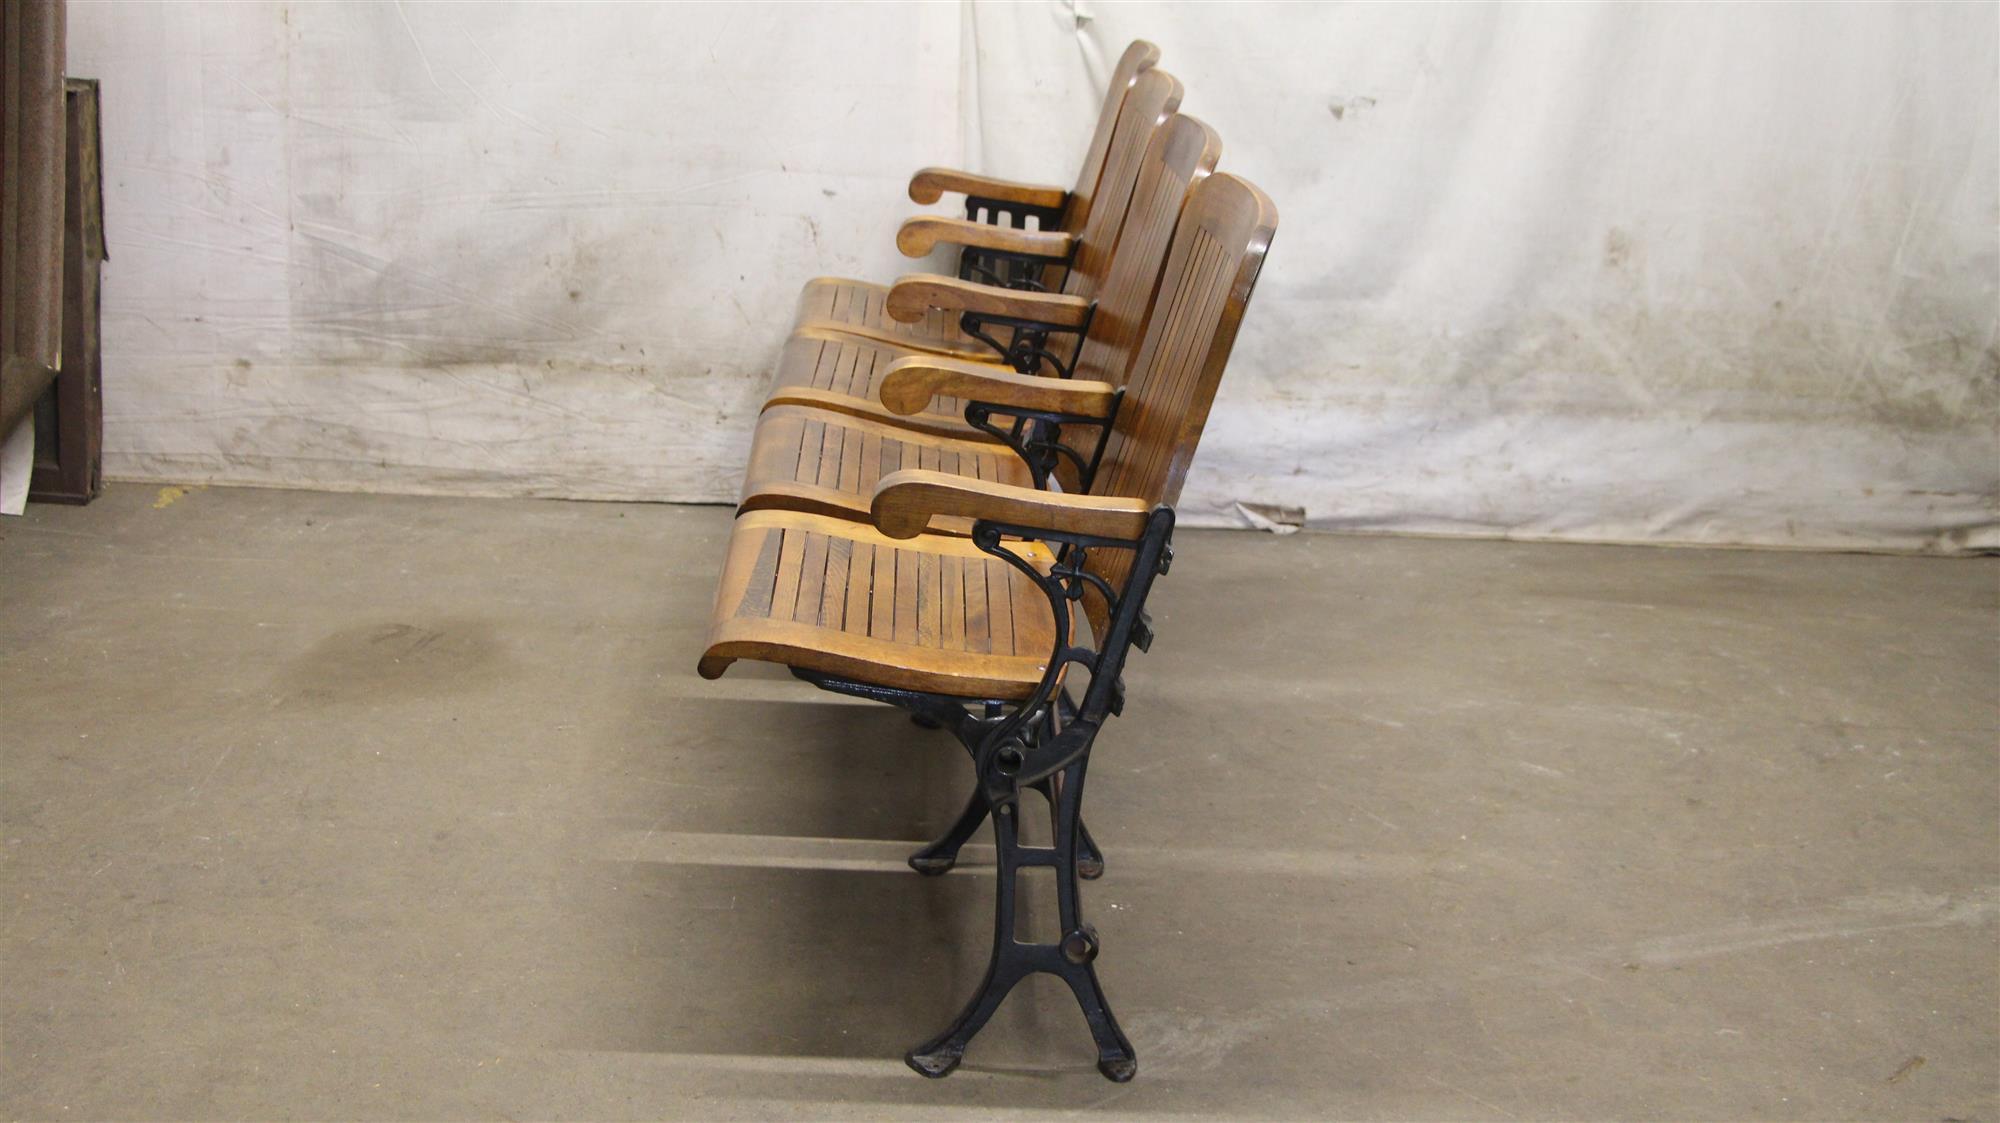 Eric, 1905 Four Seat Folding Theater Chairs with Cast Iron Frame from Brooklyn 2